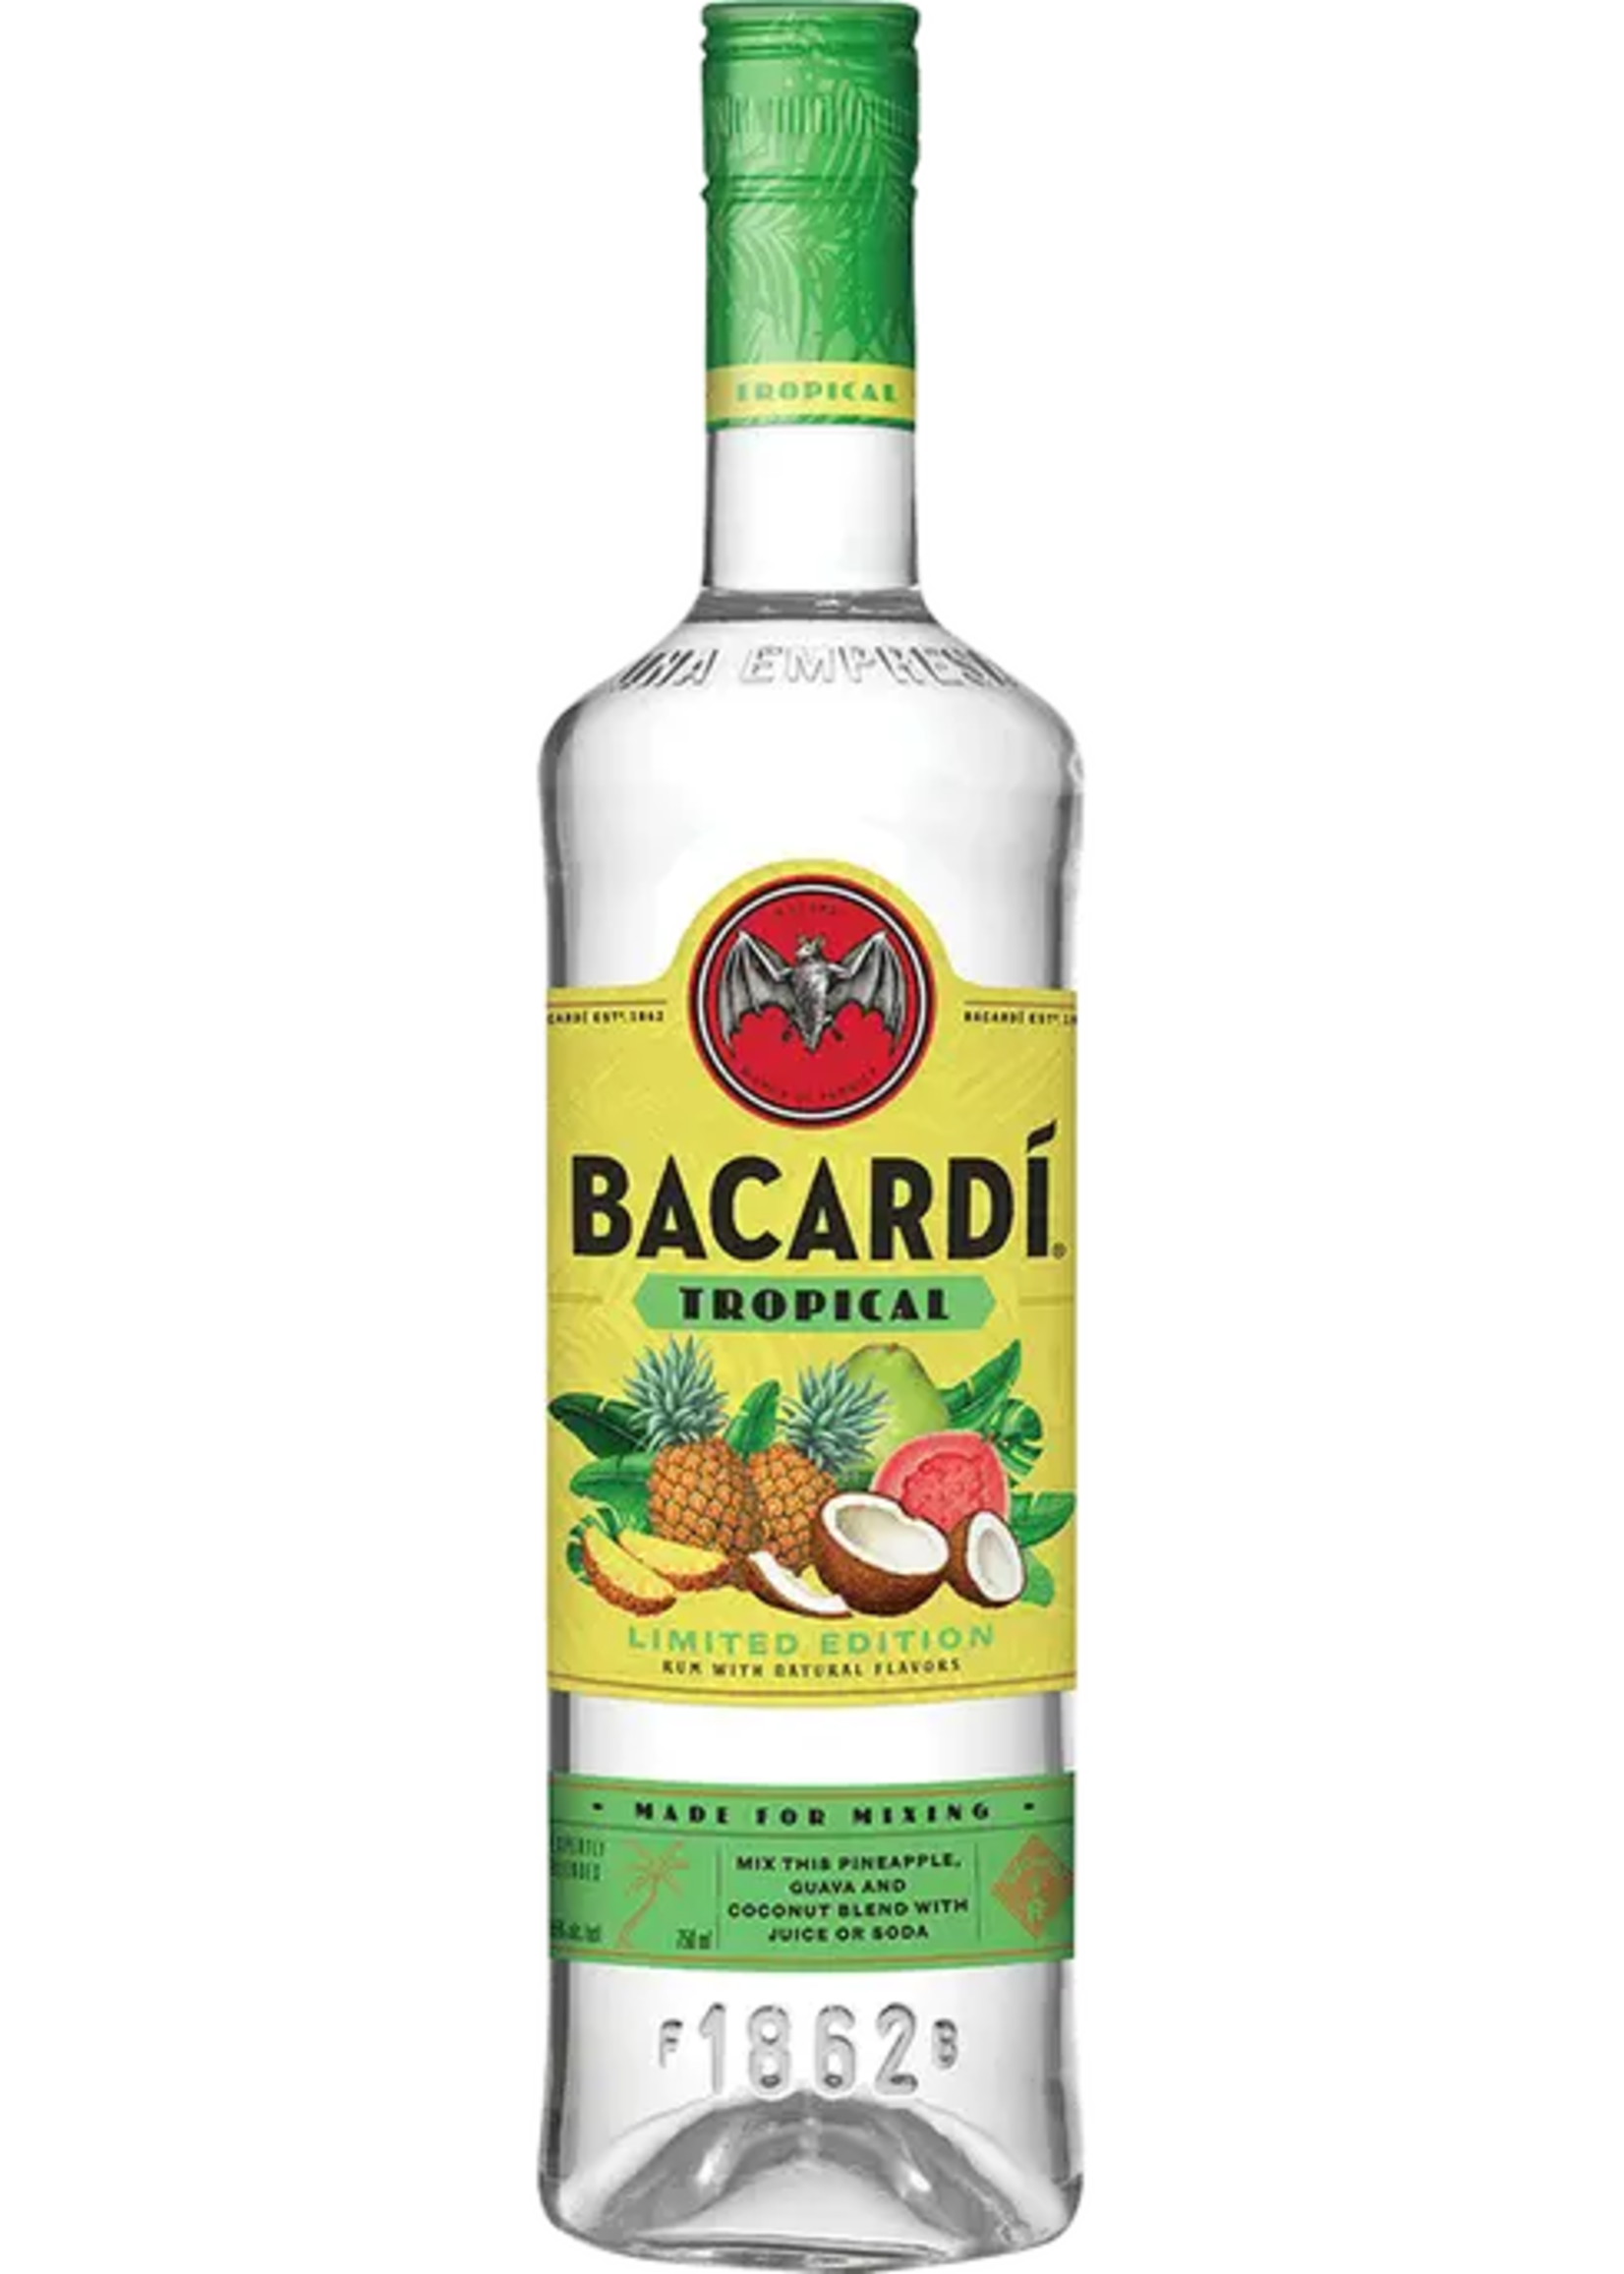 Bacardi Bacardi Tropical Flavored Rum Limited Edition 70Proof 750ml